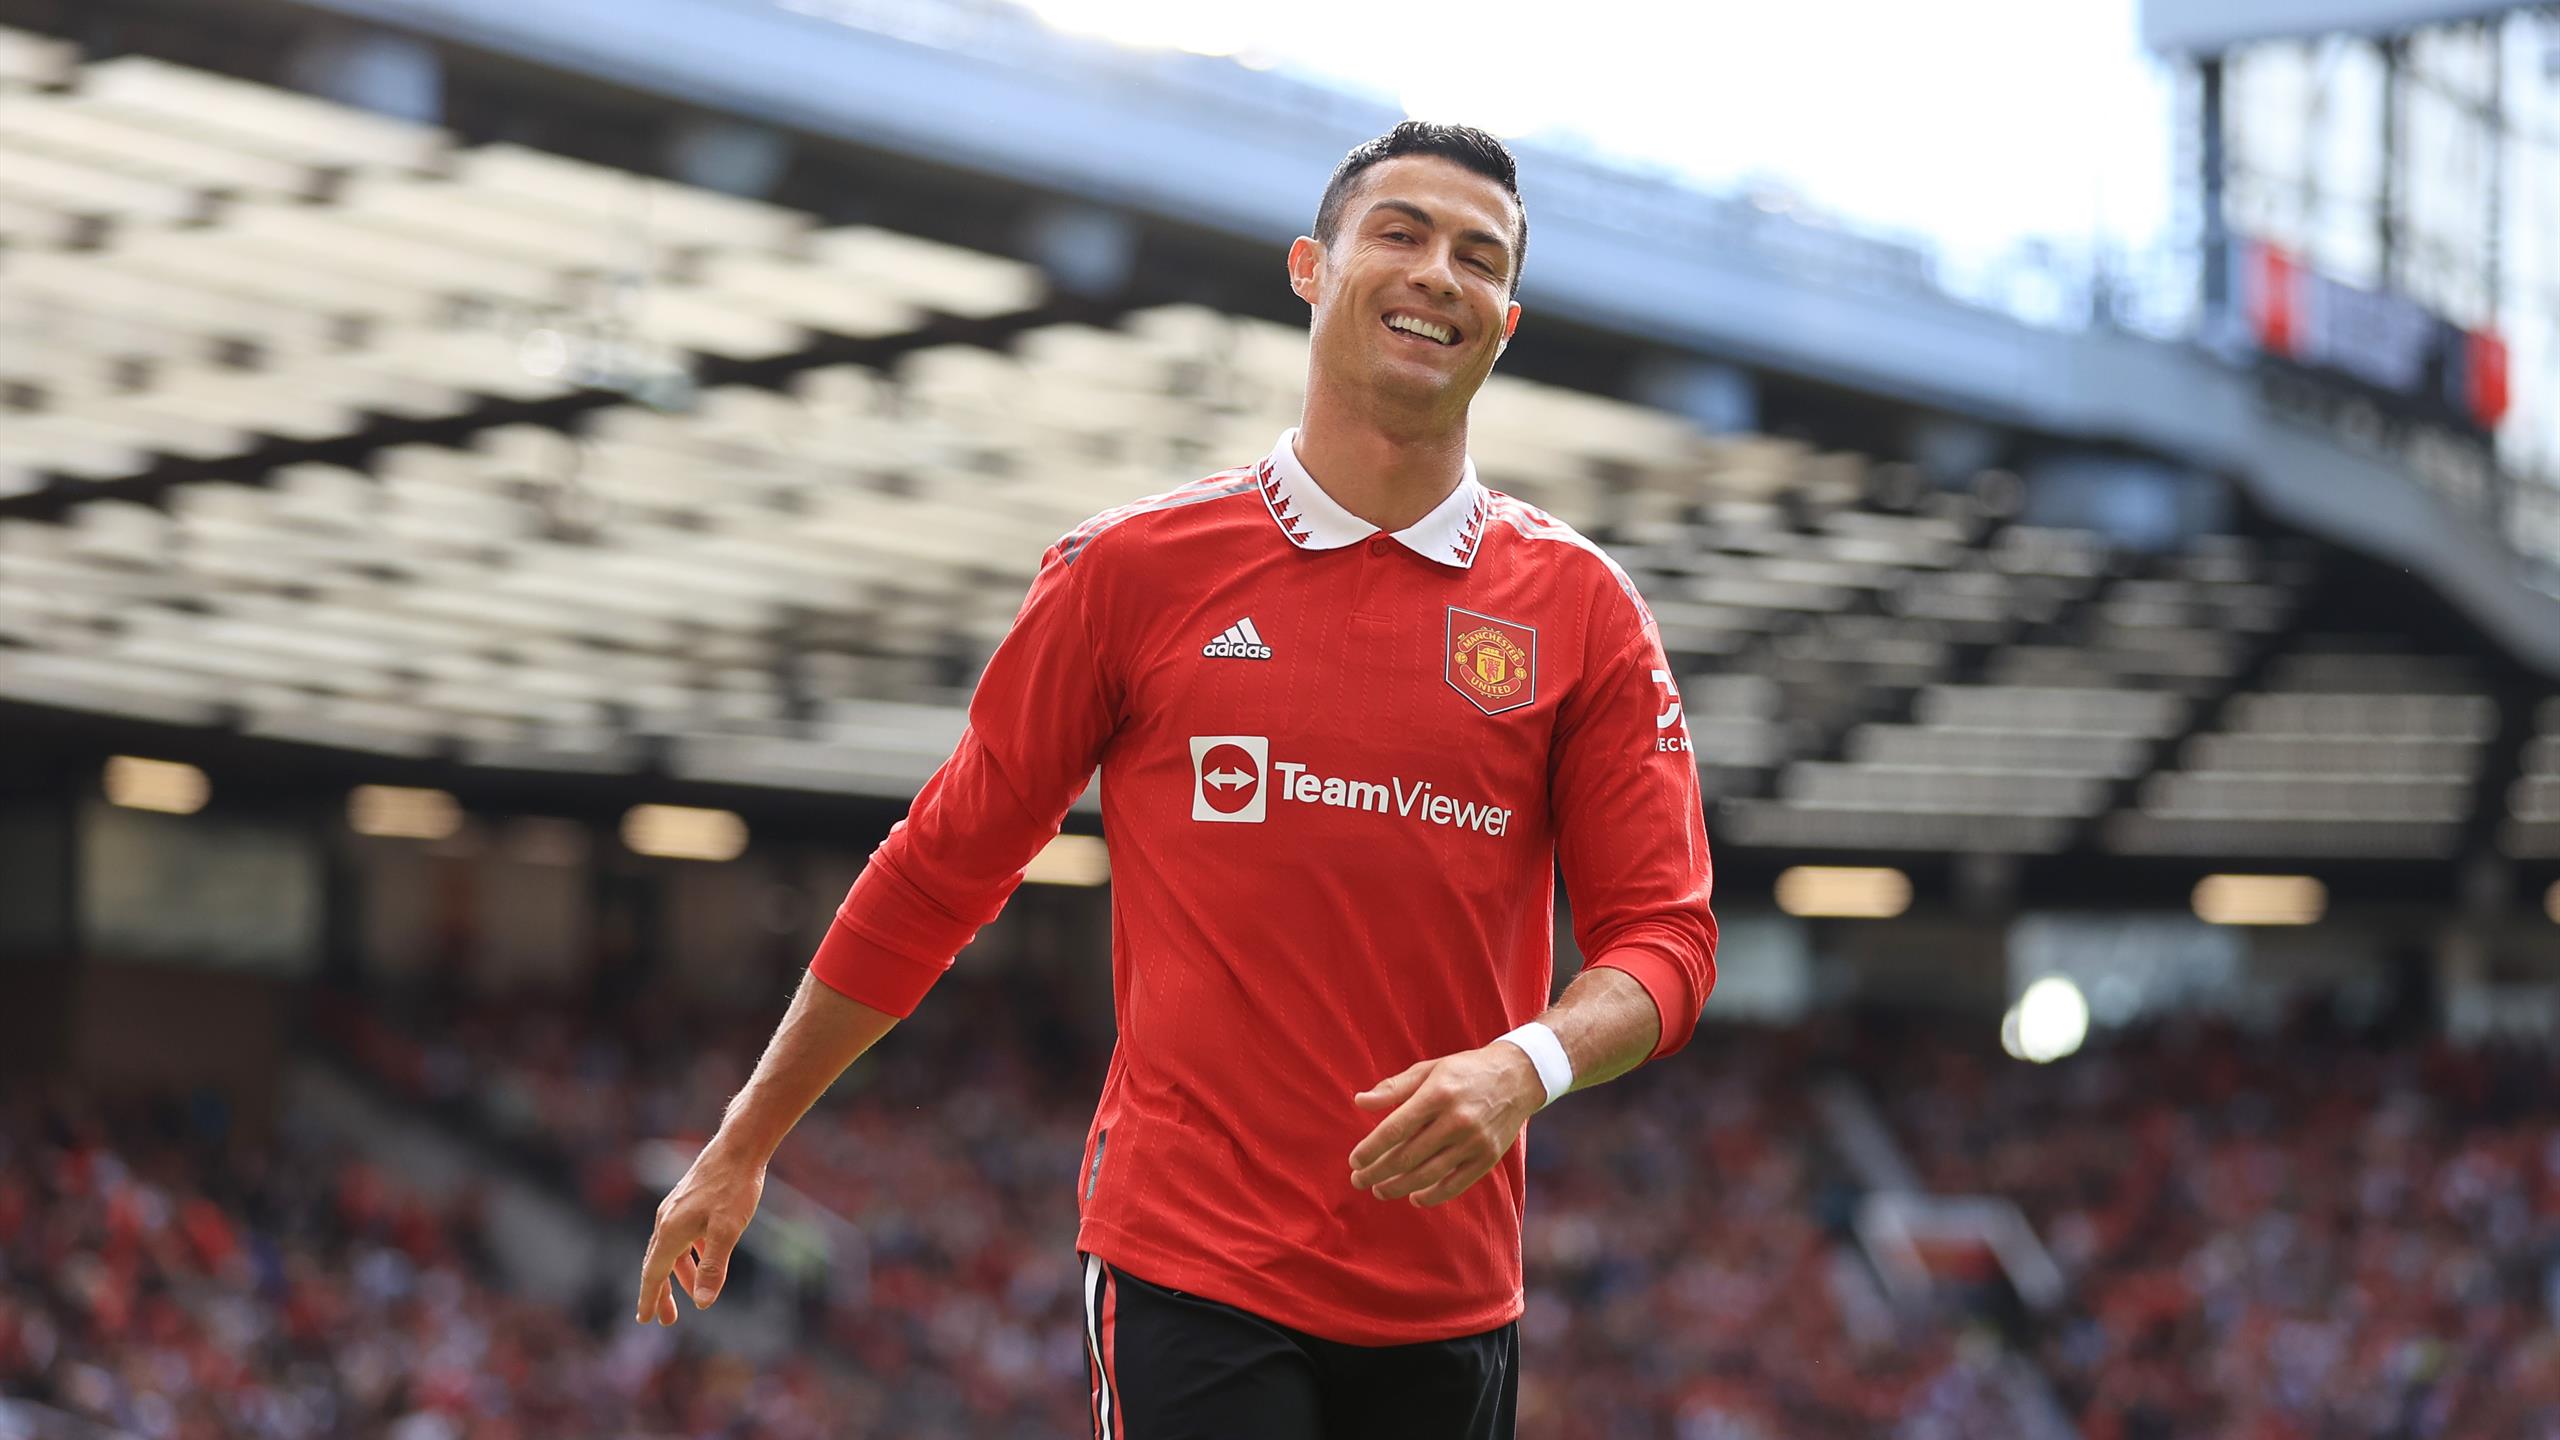 Cristiano Ronaldo: Manchester United forward starts in draw against Rayo Vallecano at Old Trafford